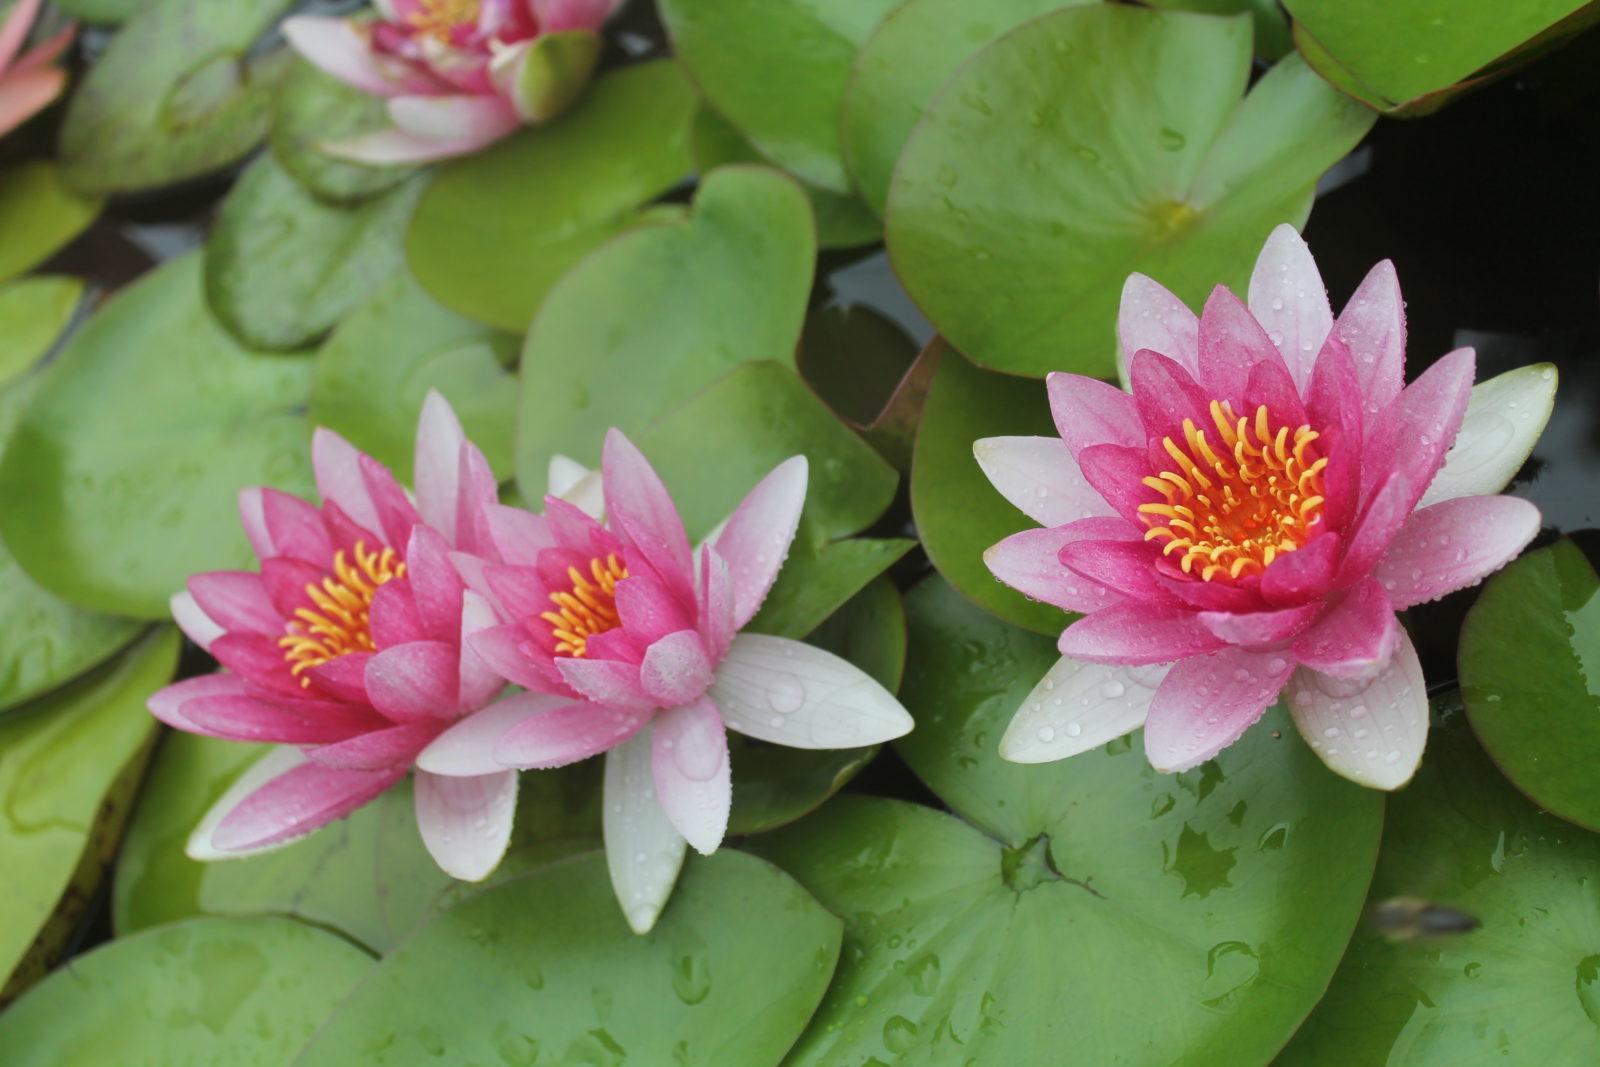 3 pond lilies blossom like karma blossoms from our past actions.